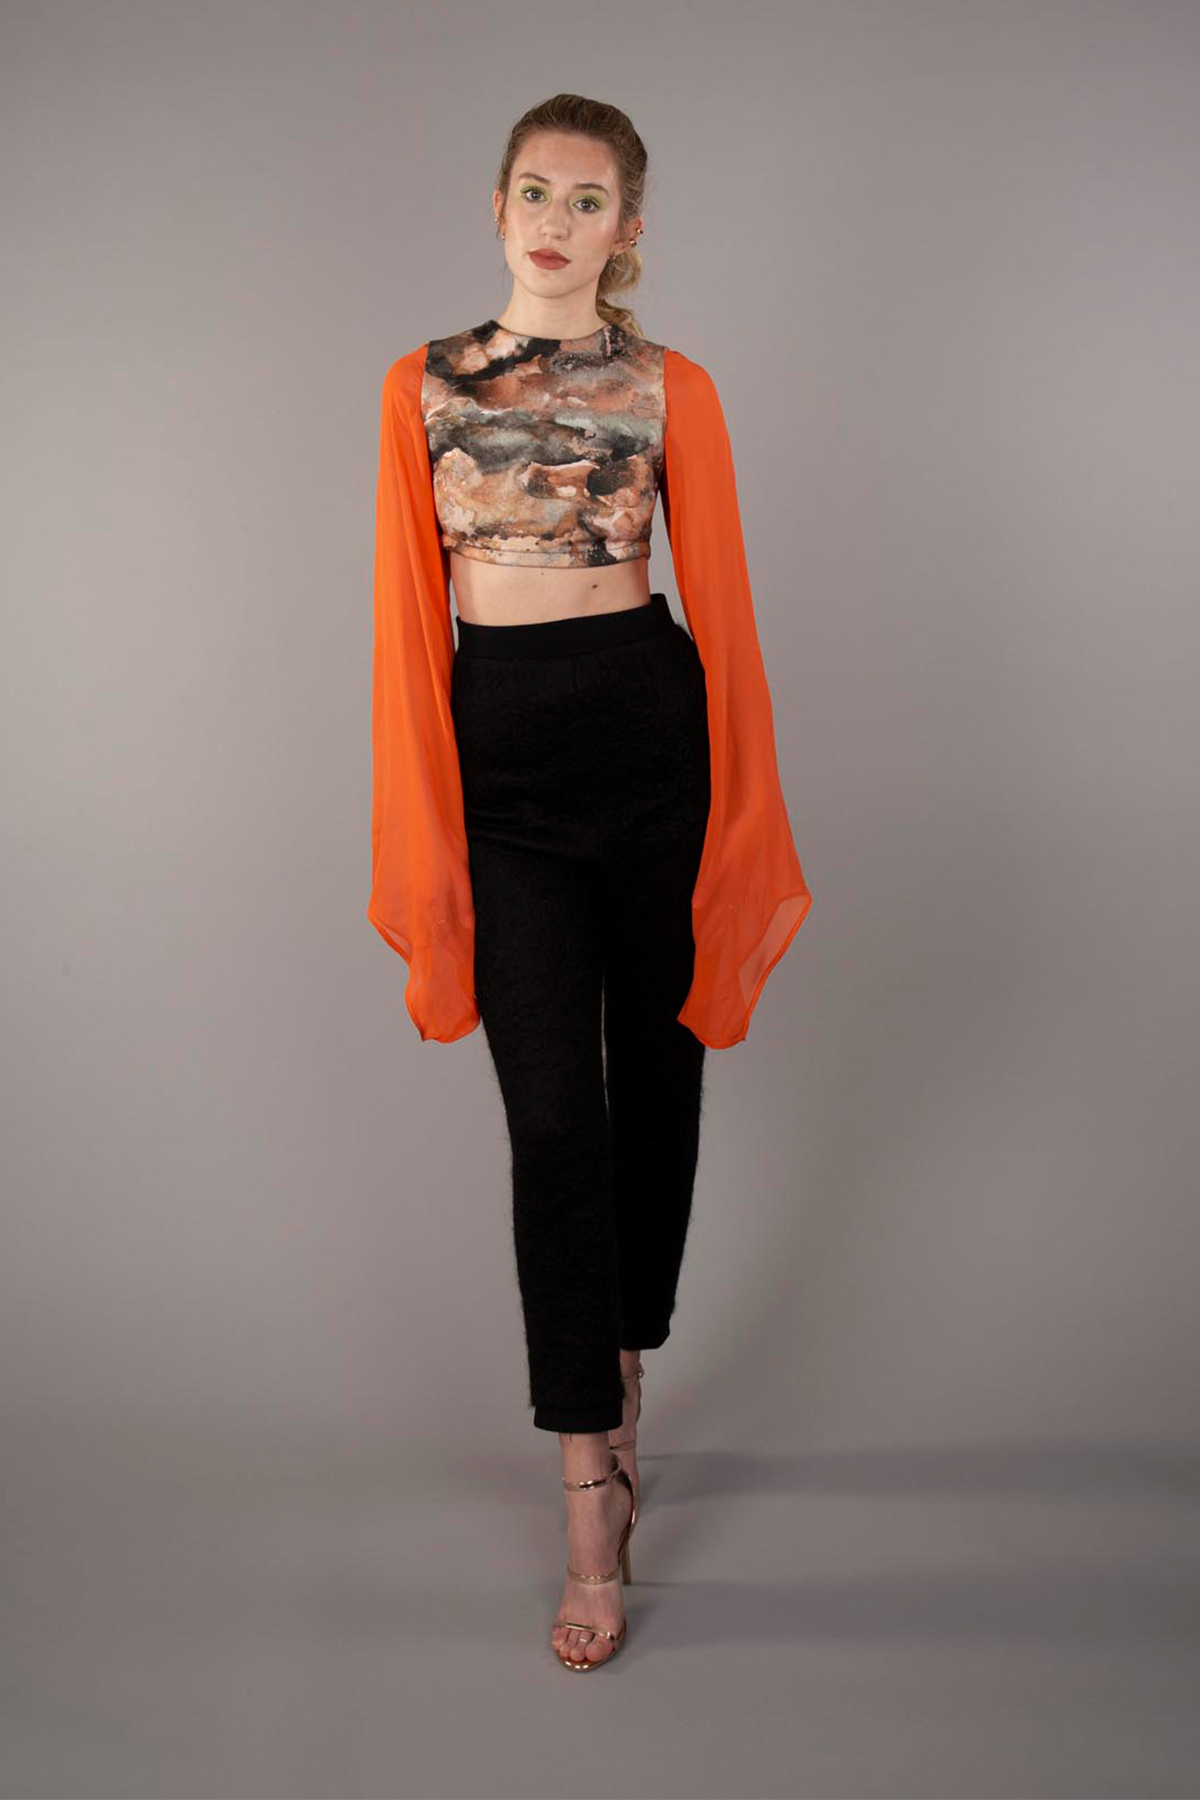 Black high-waisted mohair fitted pants paired with a cotton sateen printed crop and chiffon exaggerated sleeves